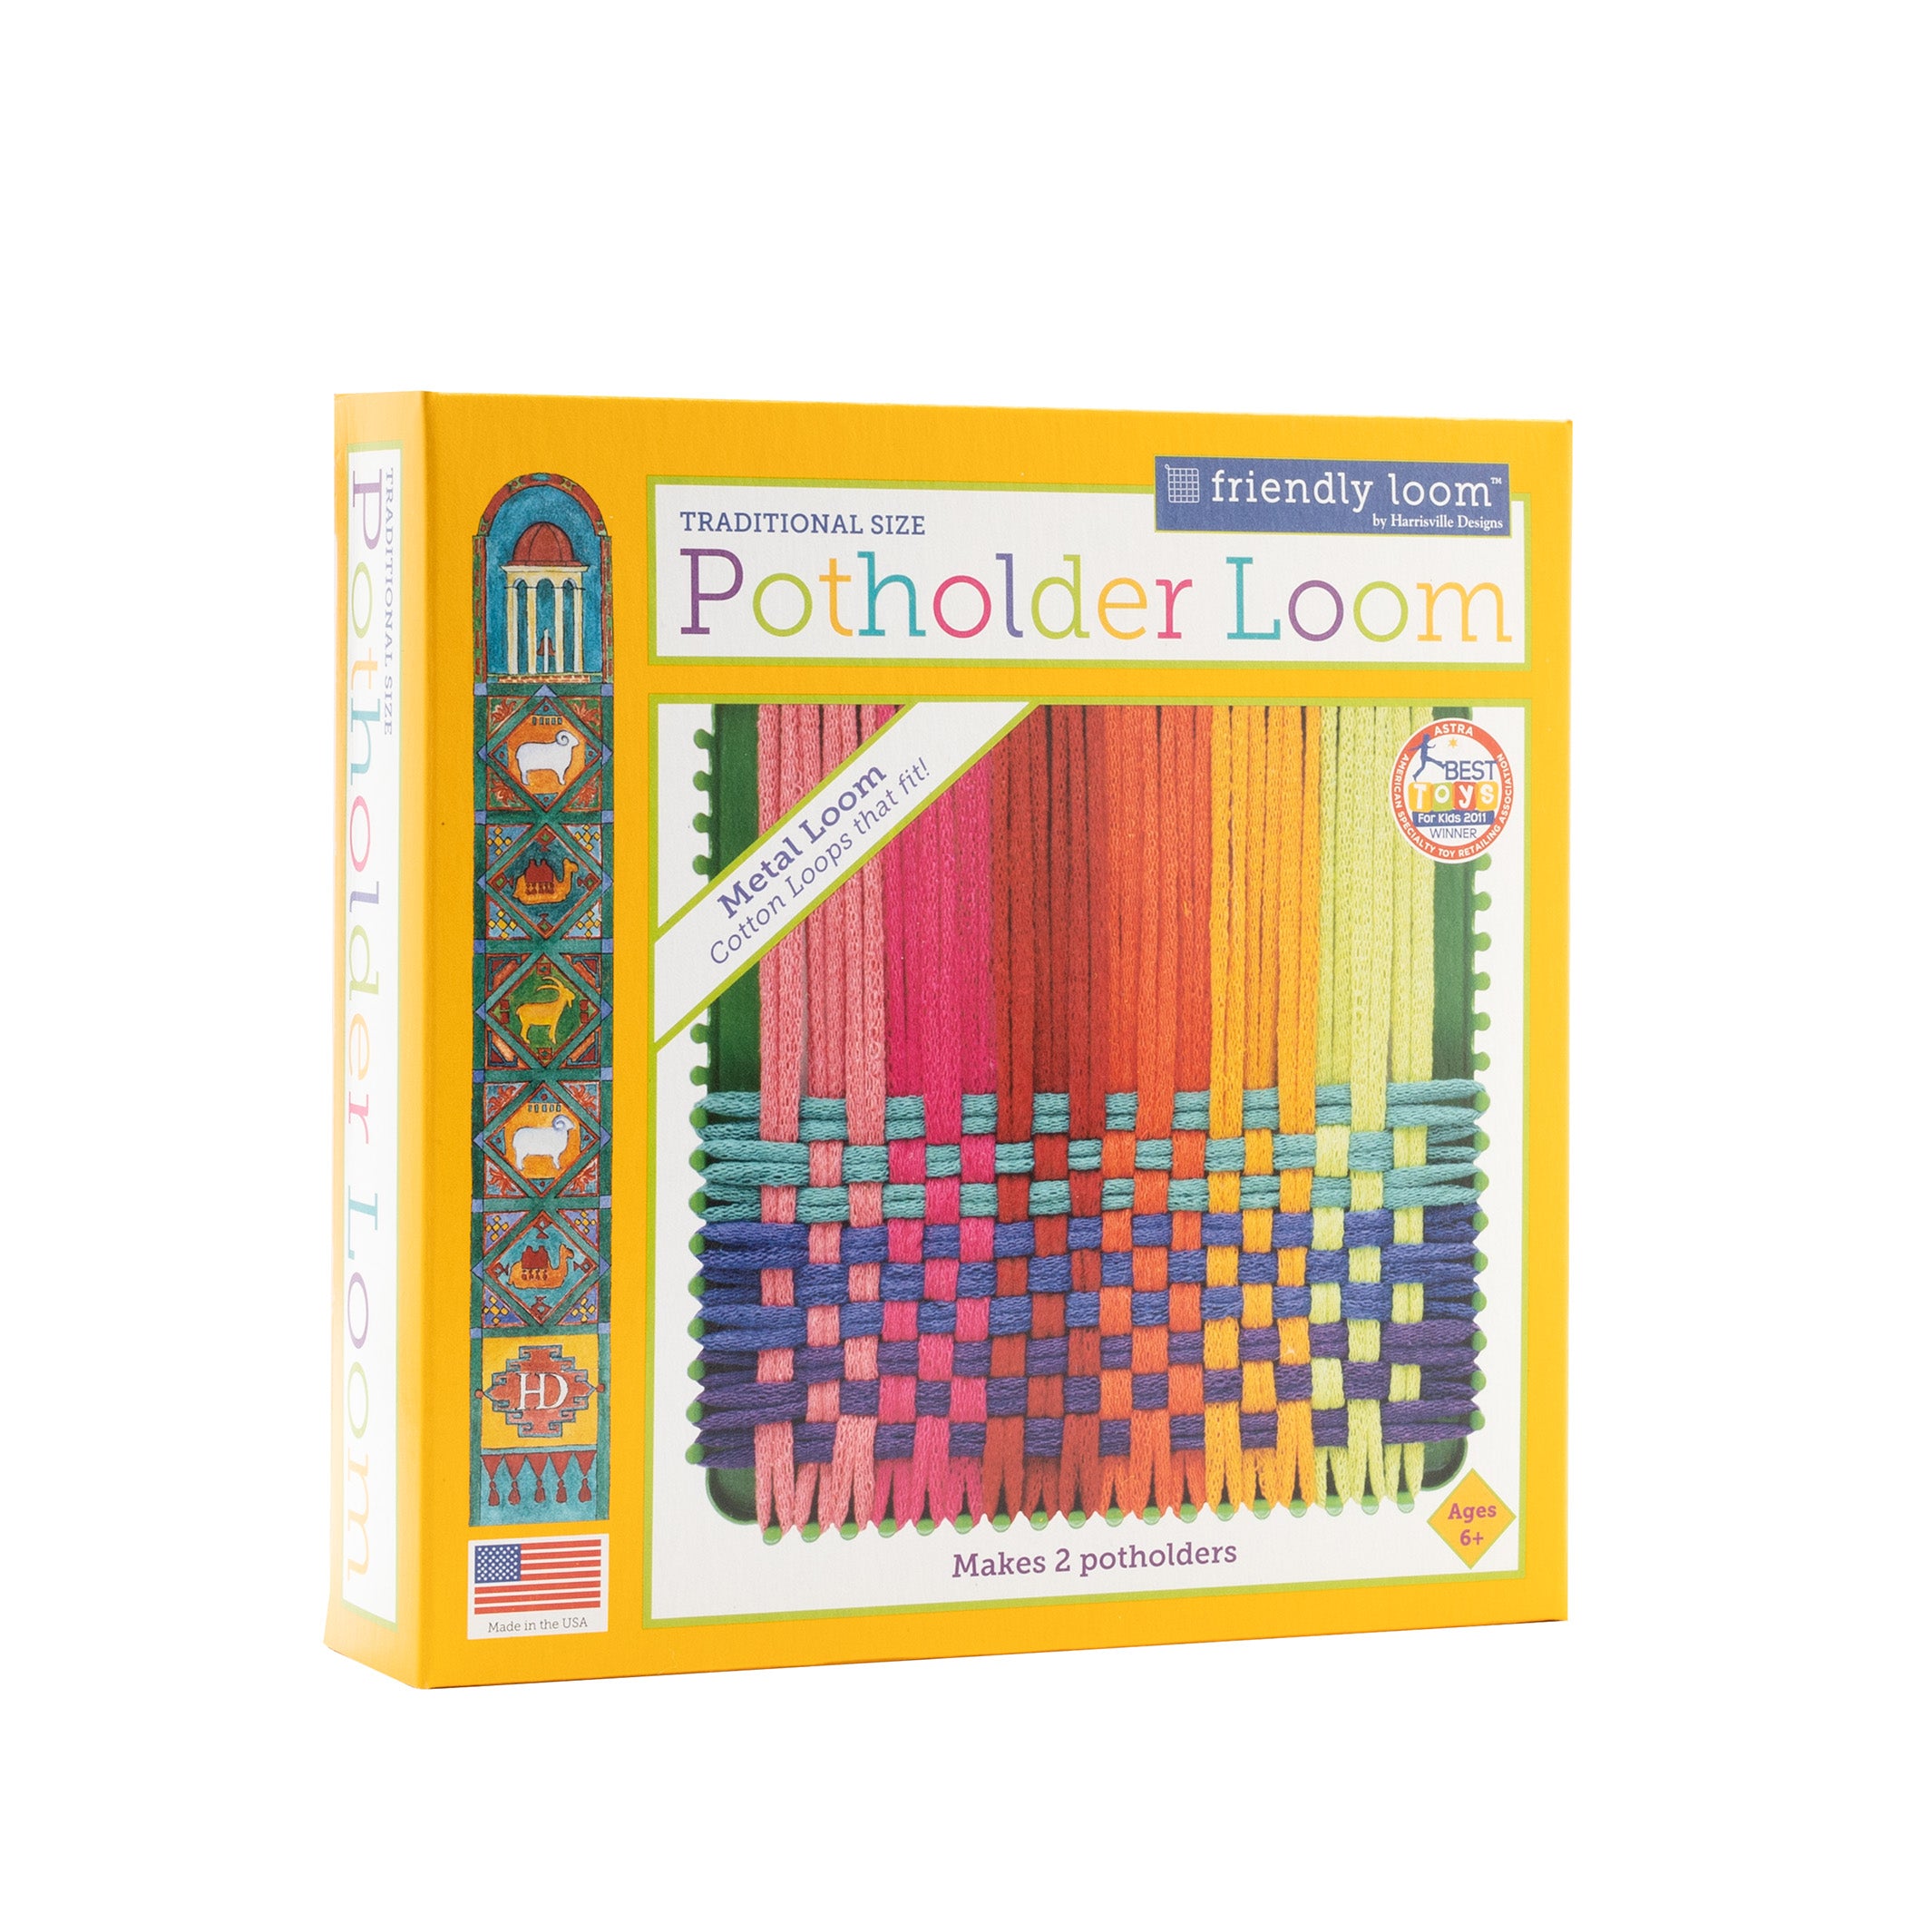 Friendly Loom 7 Potholder Kit Green Metal Loom and Bright Rainbow Color  Cotton Loops, Makes 2 Potholders, MADE IN THE USA by Harrisville Designs.